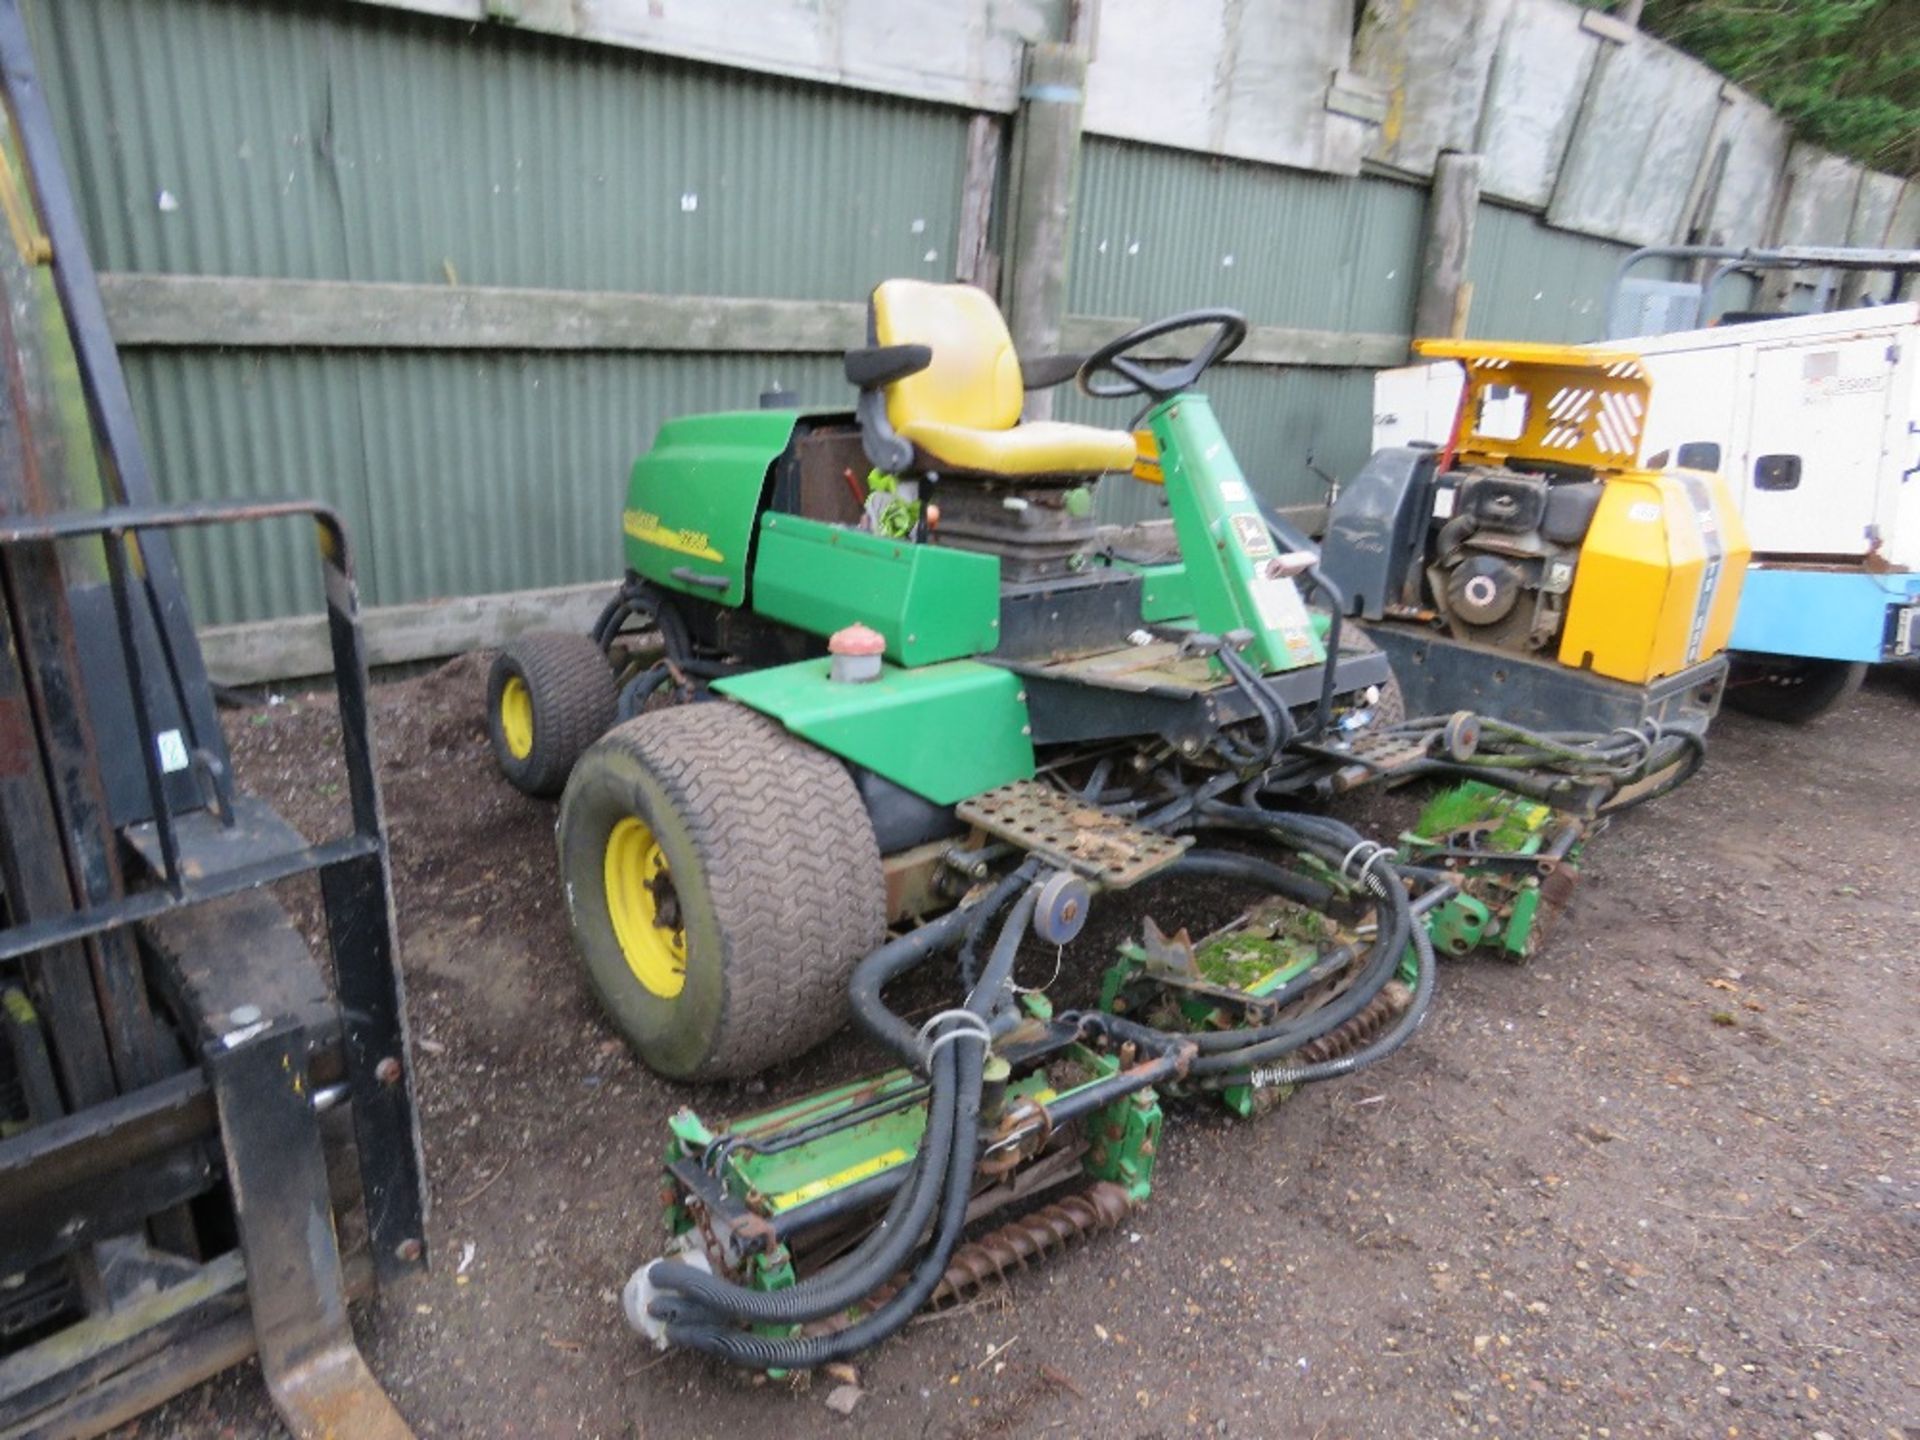 JOHN DEERE 3235B 5 GANG CYLINDER MOWER, YEAR 2001 APPROX. WHEN TESTED WAS SEEN TO RUN, DRIVE AND MOW - Image 2 of 11